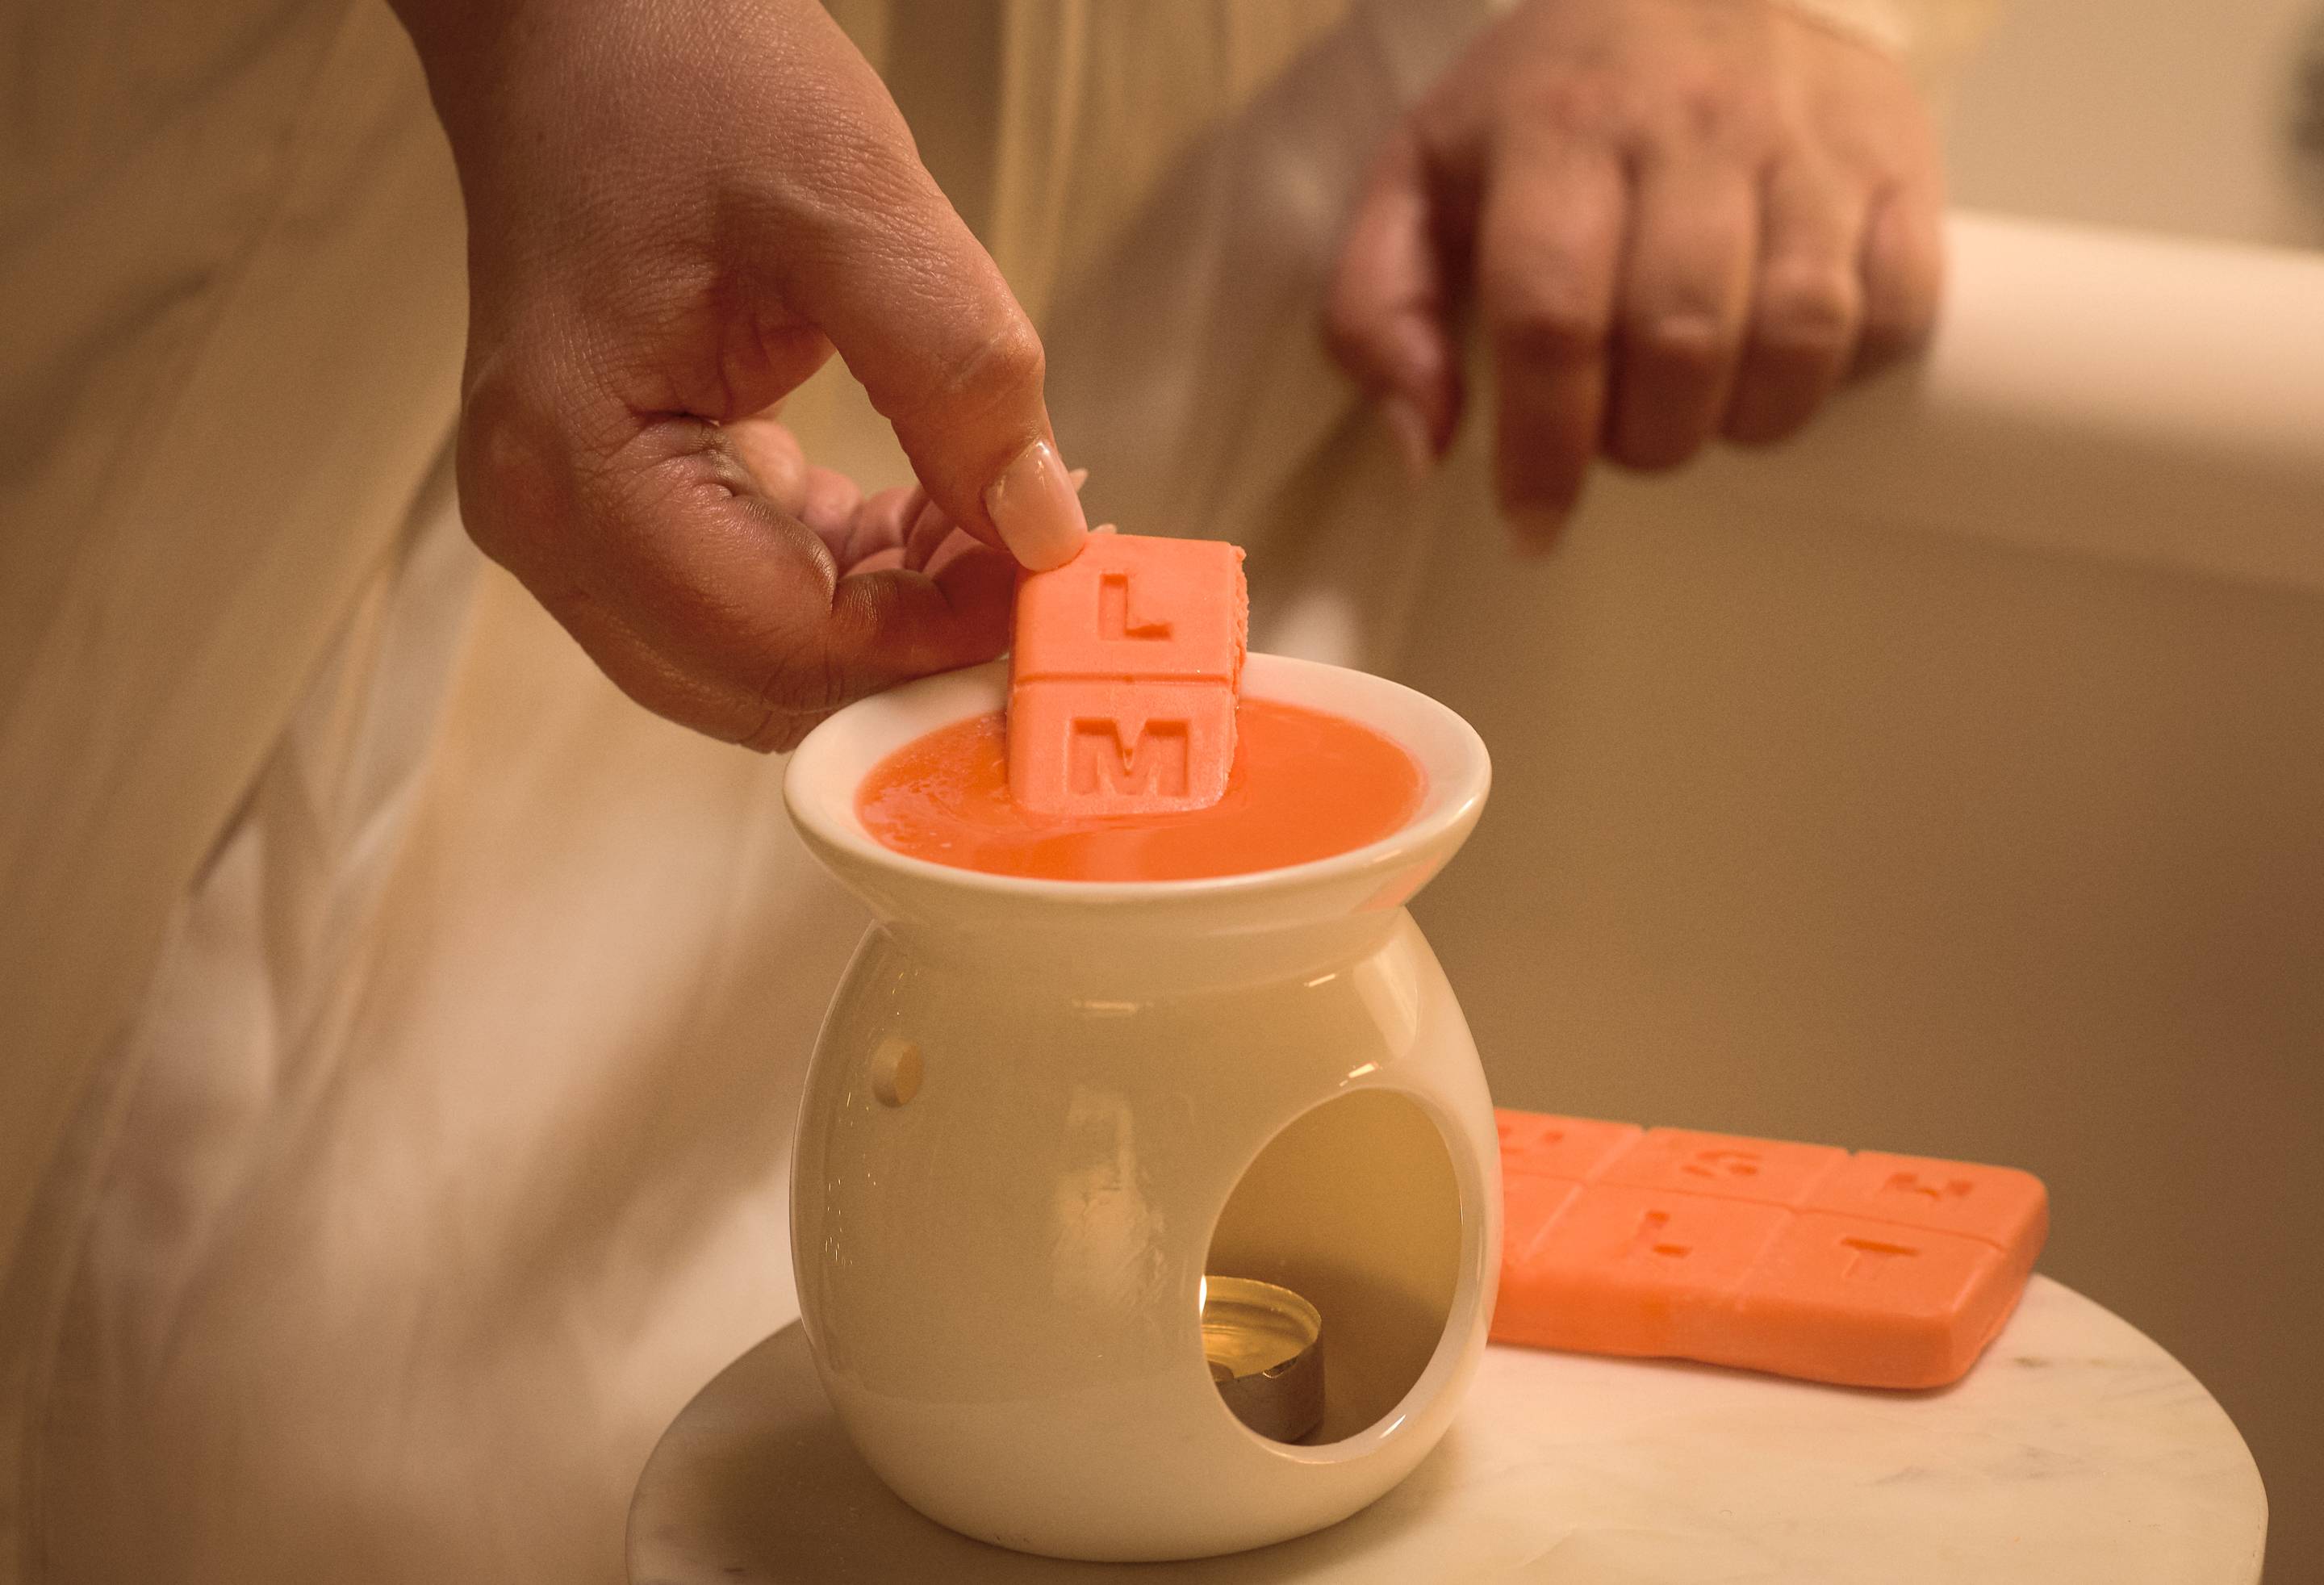 The image shows a close-up of the model placing two pieces of wax melt into a white wax burner with a lit tealight. 